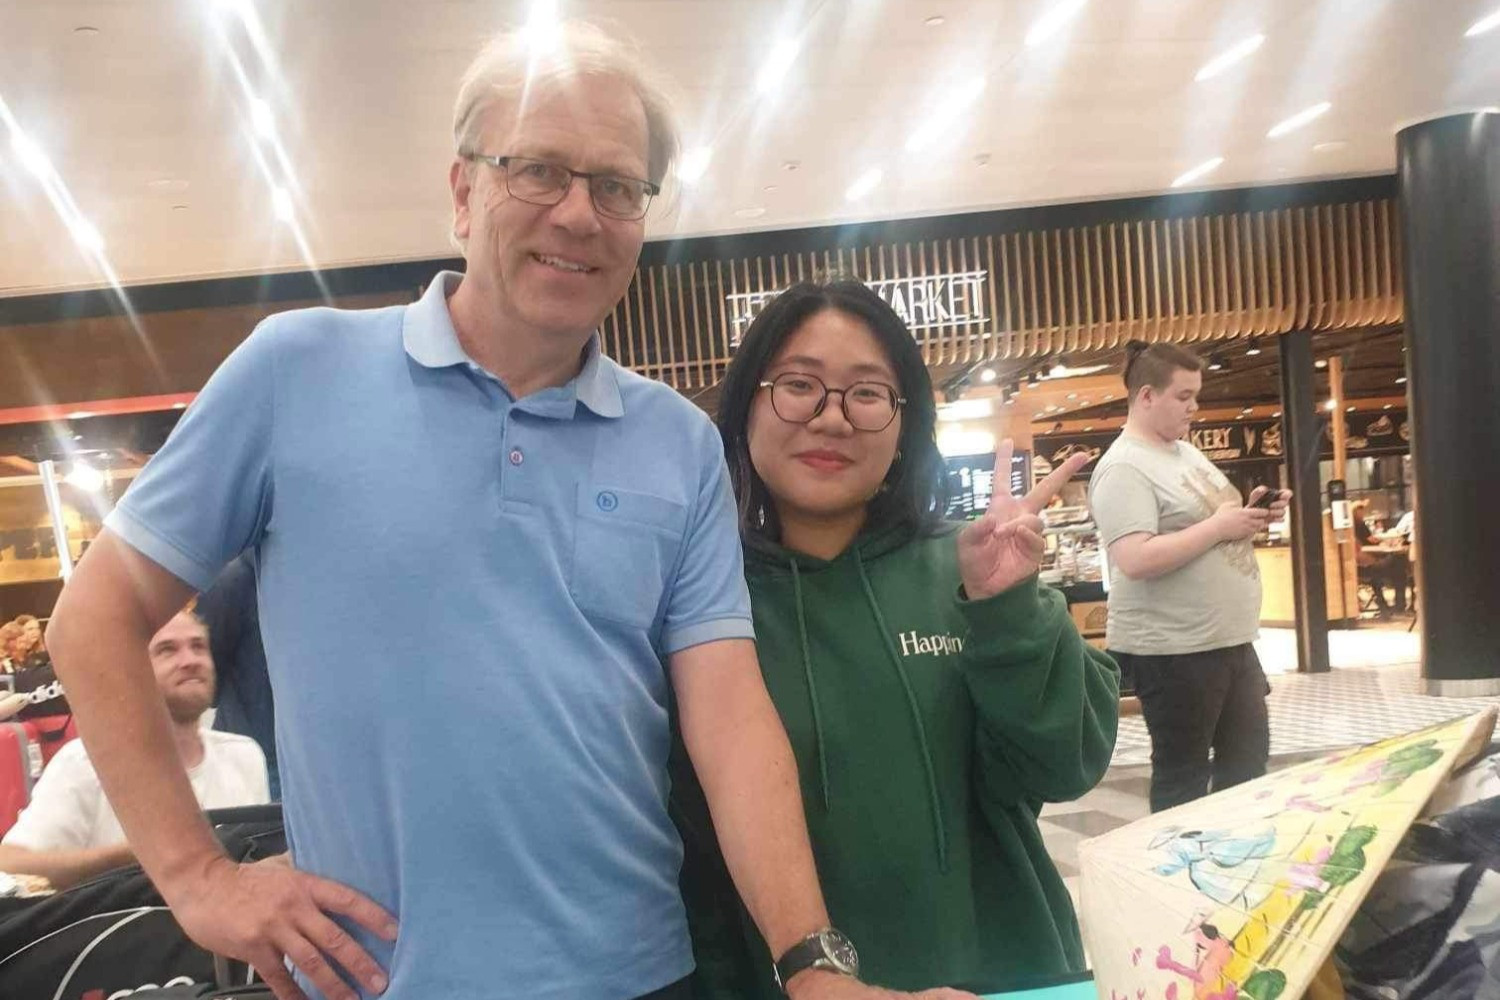 Finnish high school principal "Sankari Simo" drives more than 100km by himself to welcome Vietnamese students to Forssa High School